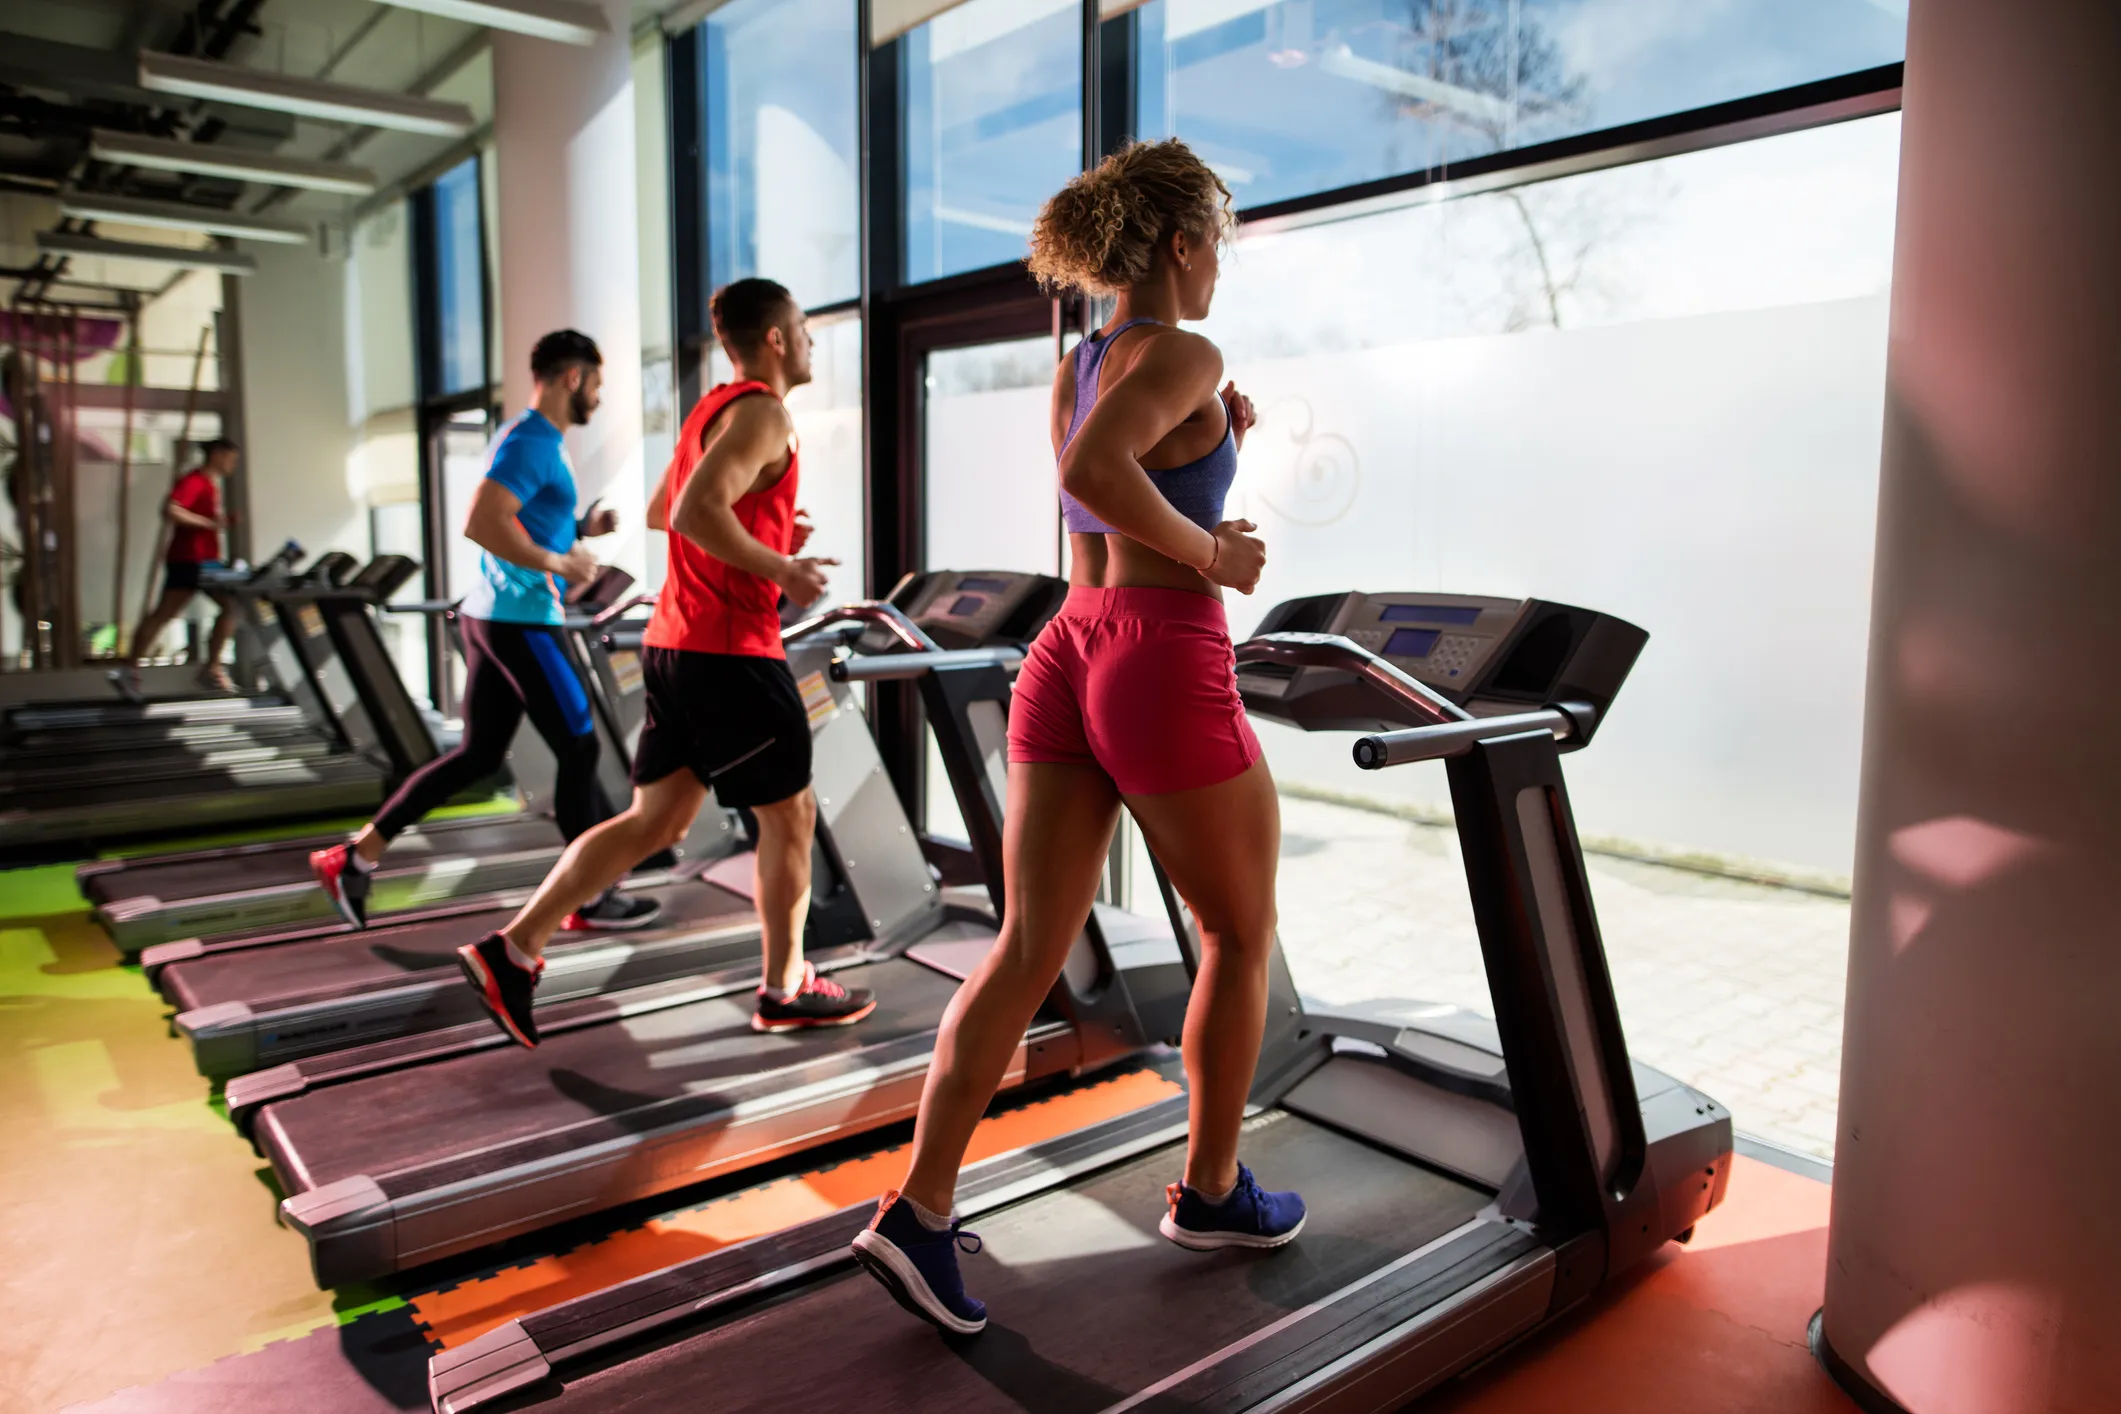 small group of young people running on treadmill in royalty free image 1569853245